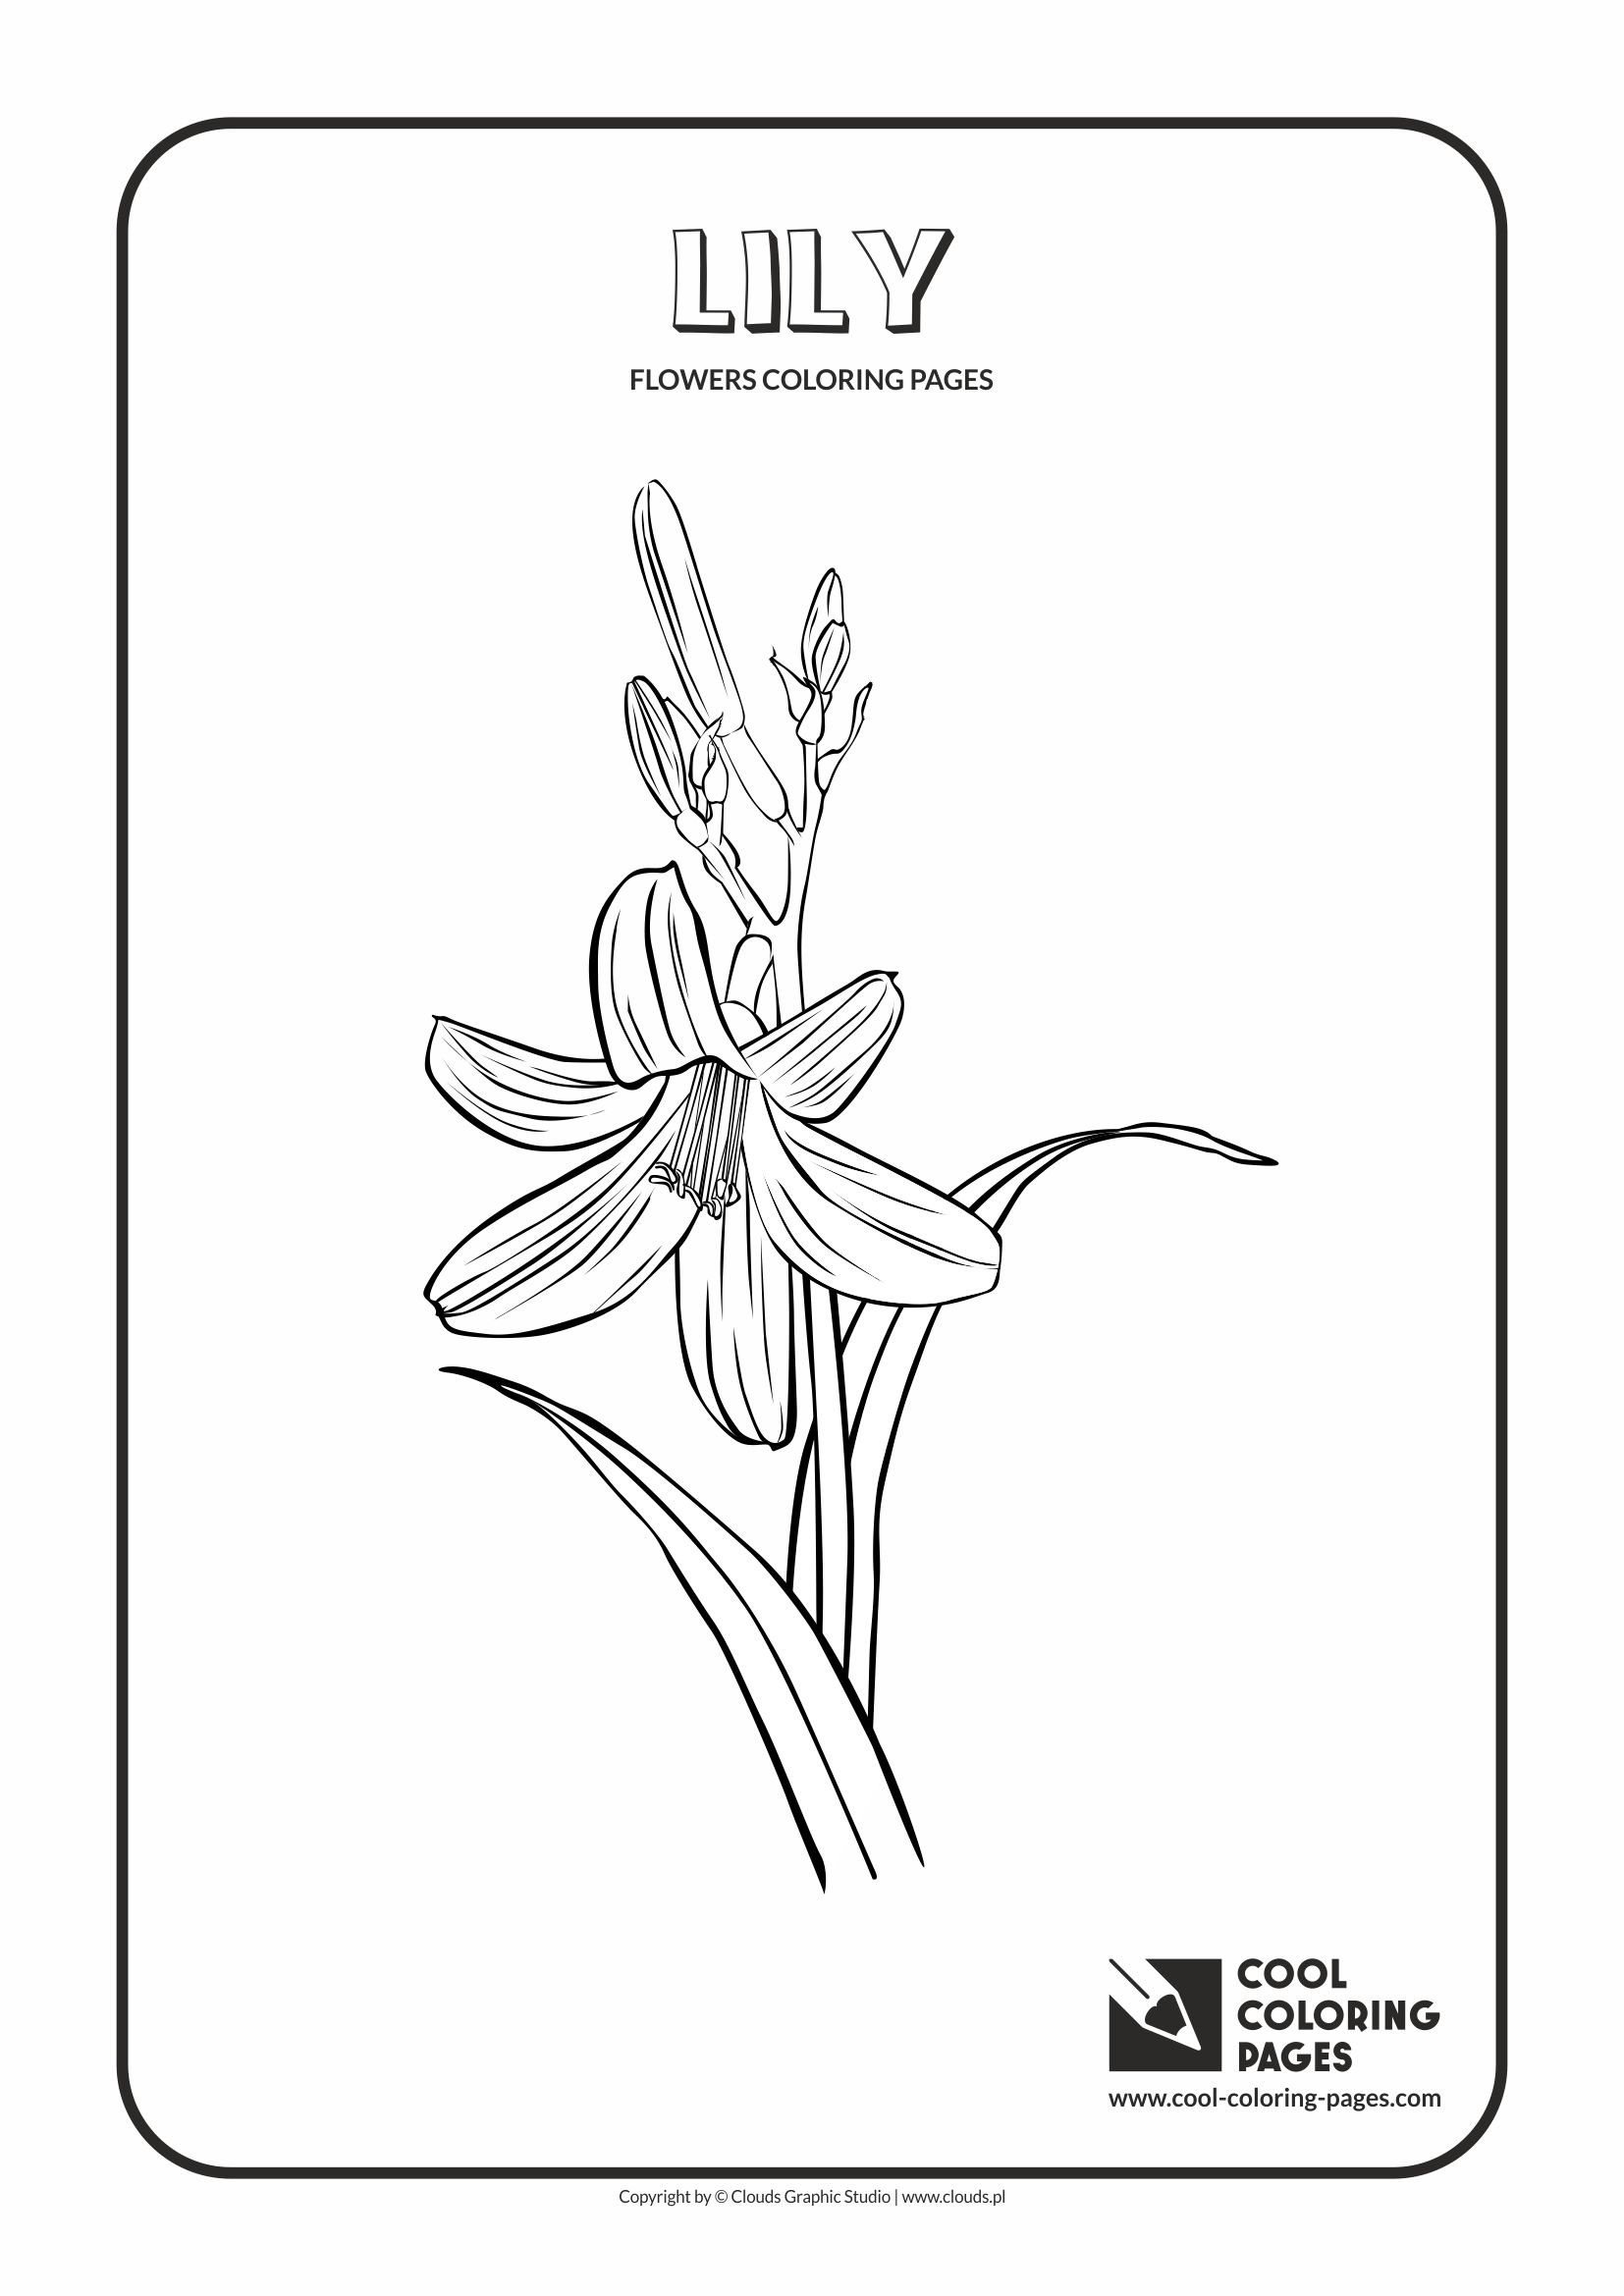 Cool Coloring Pages - Plants / Lily / Coloring page with lily